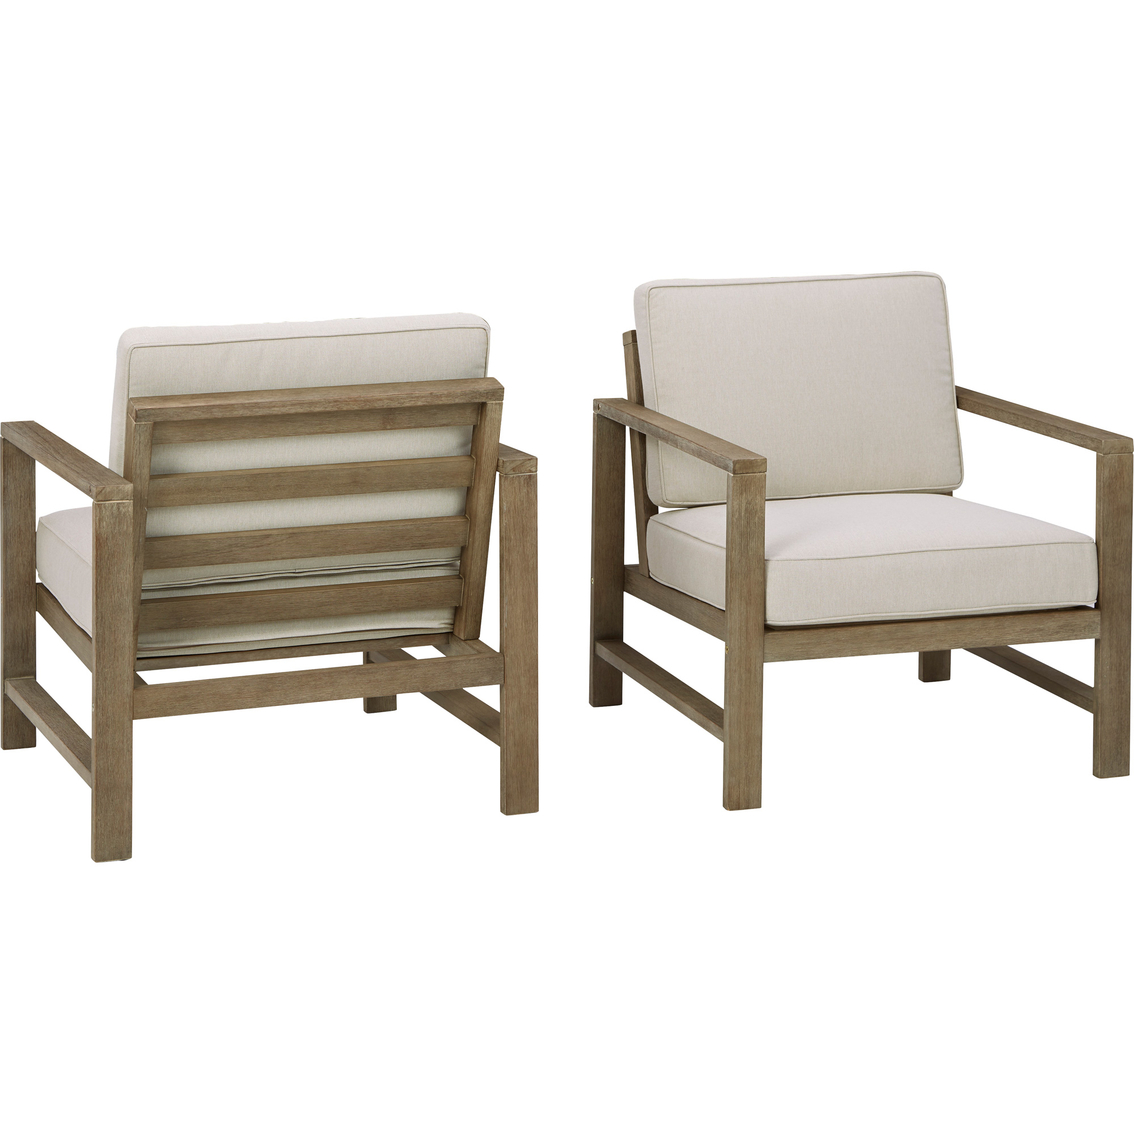 Signature Design by Ashley Fynnegan 4 pc. Outdoor Set - Image 3 of 5